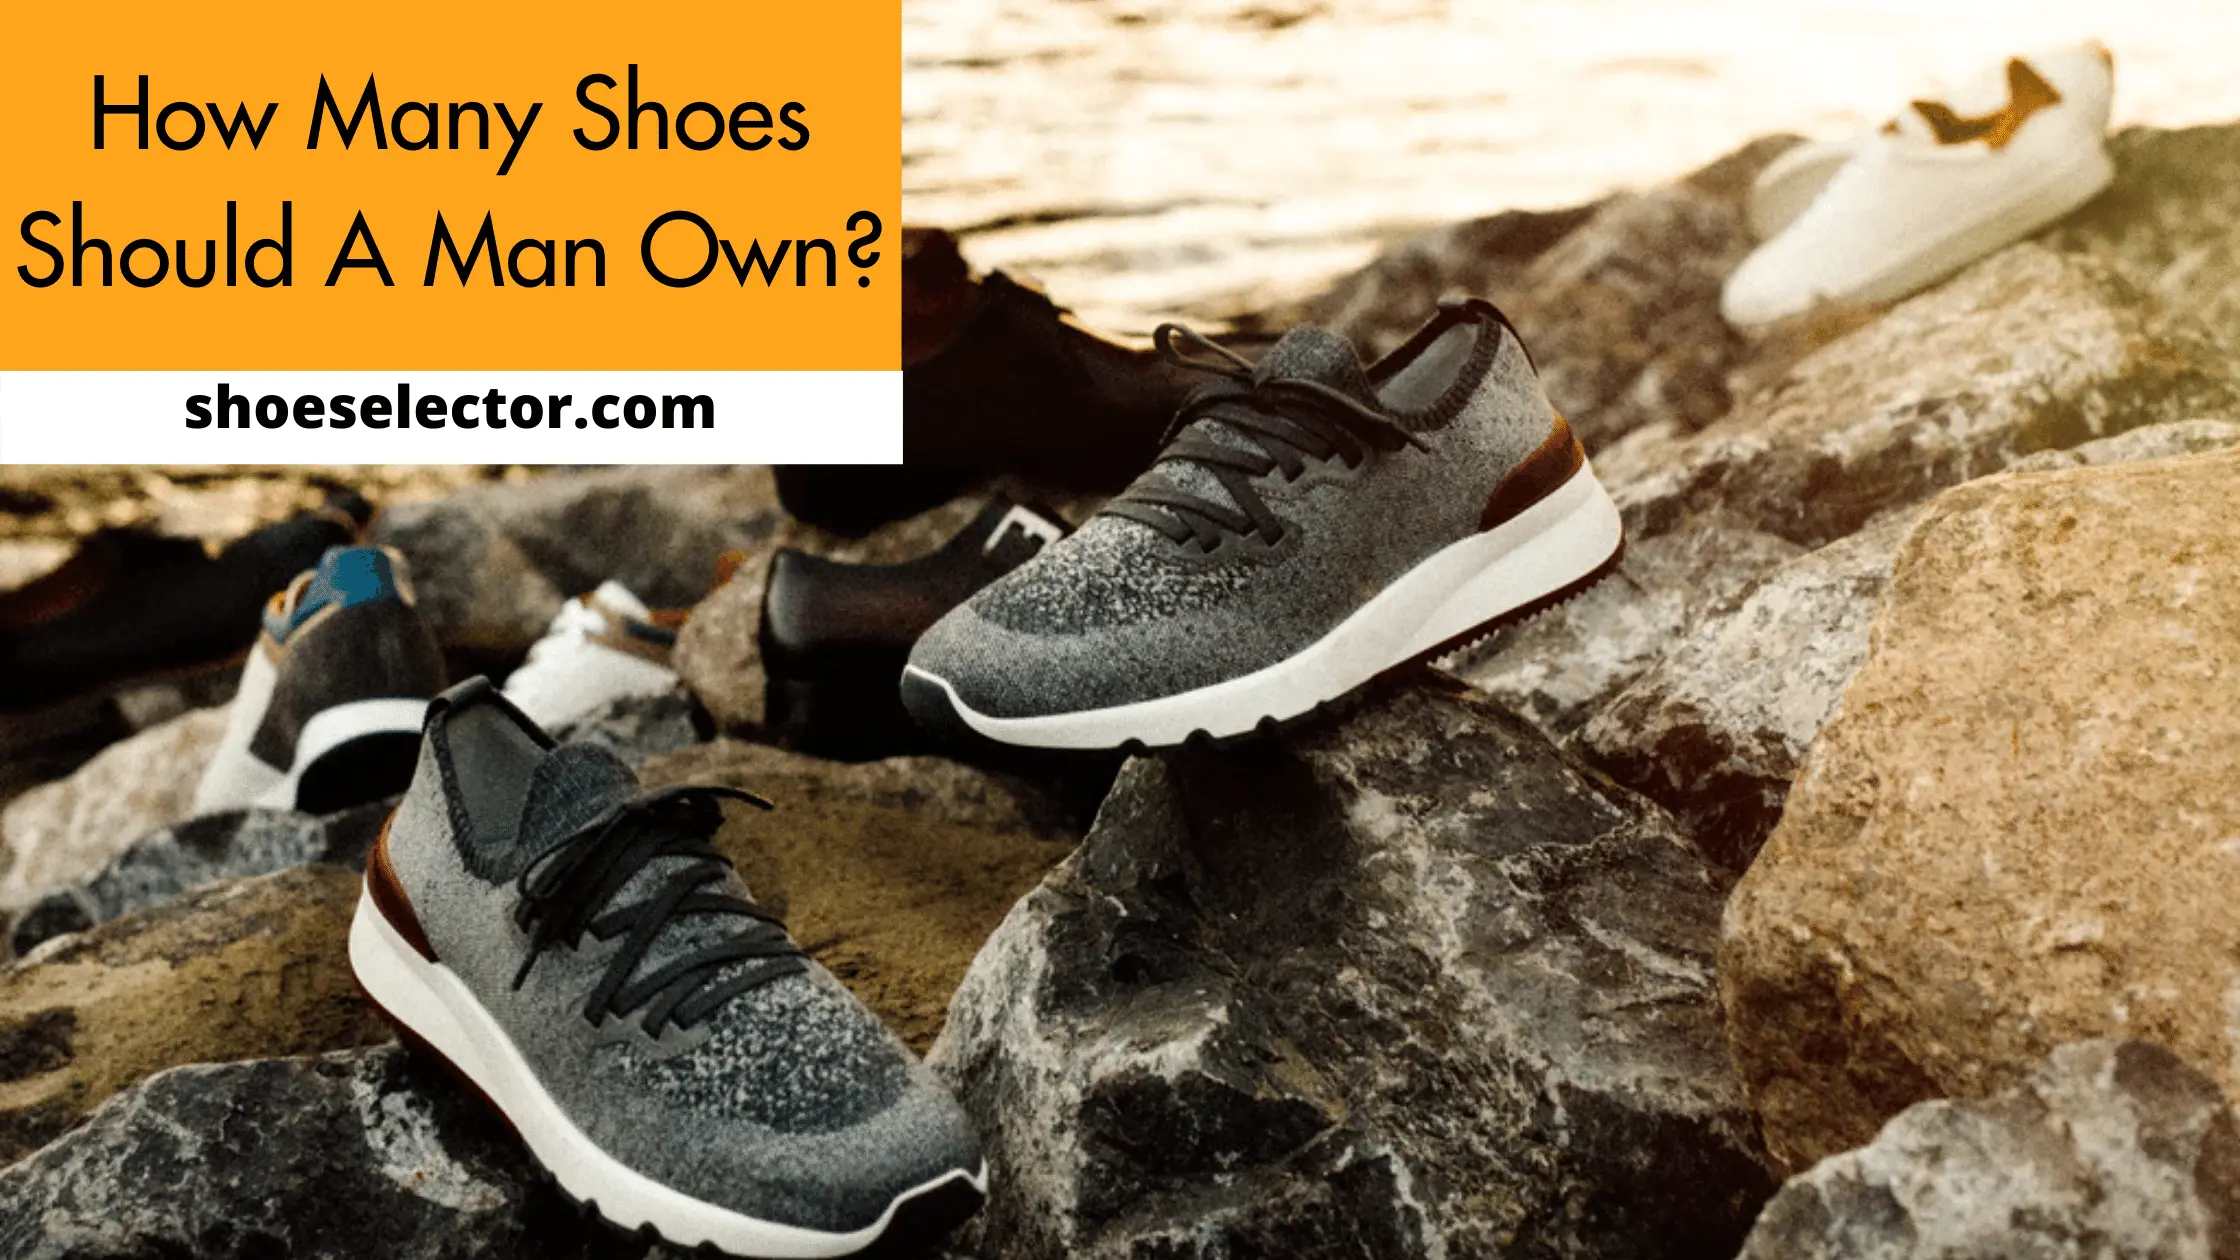 How Many Shoes Should a Man Own? Easy Guide